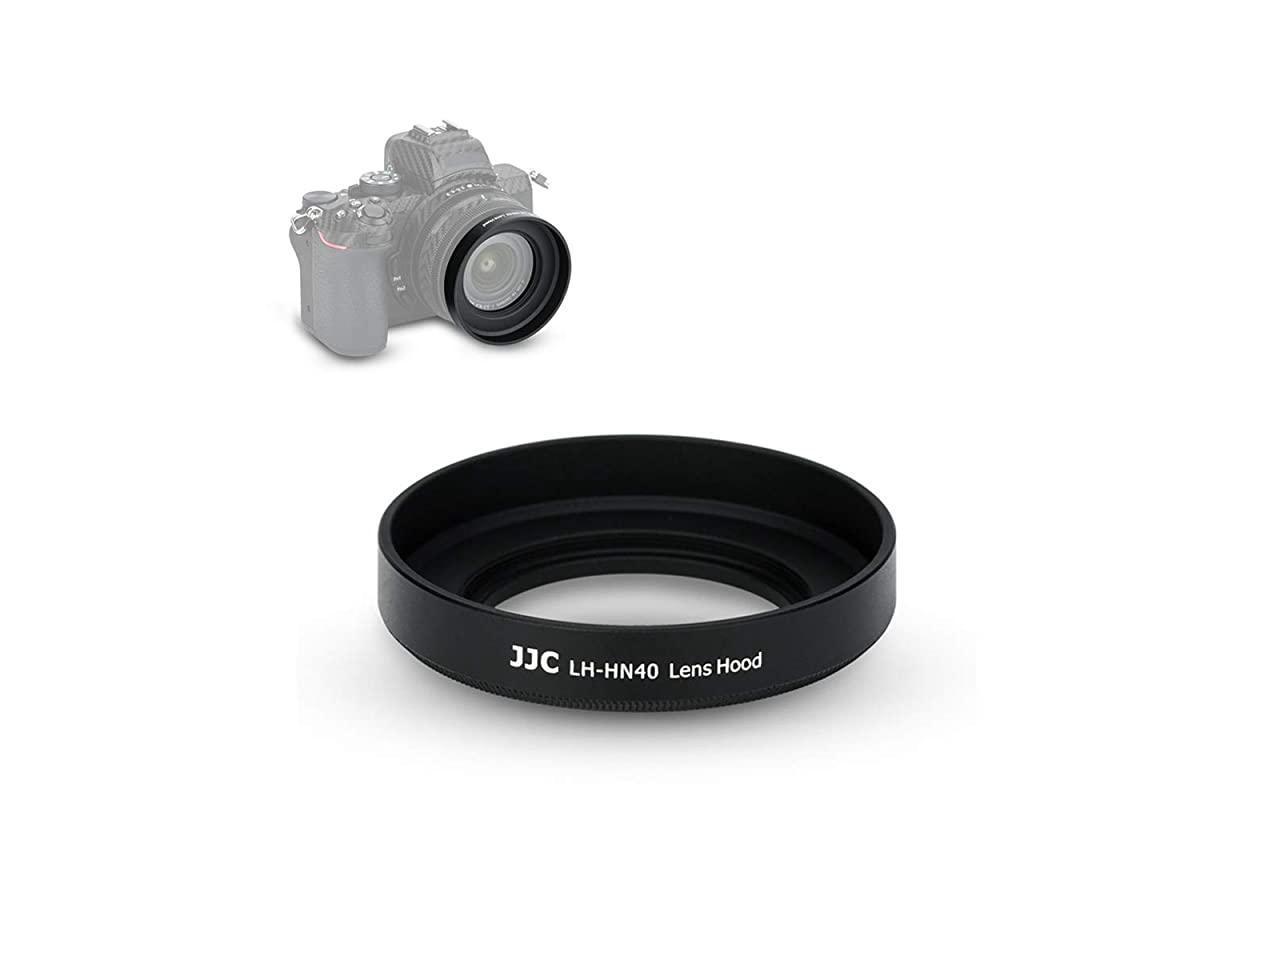 Silver Screw-in Lens Hood Shade for Nikon Z DX 16-50mm f/3.5-6.3 VR Lens on Nikon Z fc Zfc Z50 Replaces Nikon HN-40 Lens Hood Allows to Attach 46mm Filter & Lens Cap